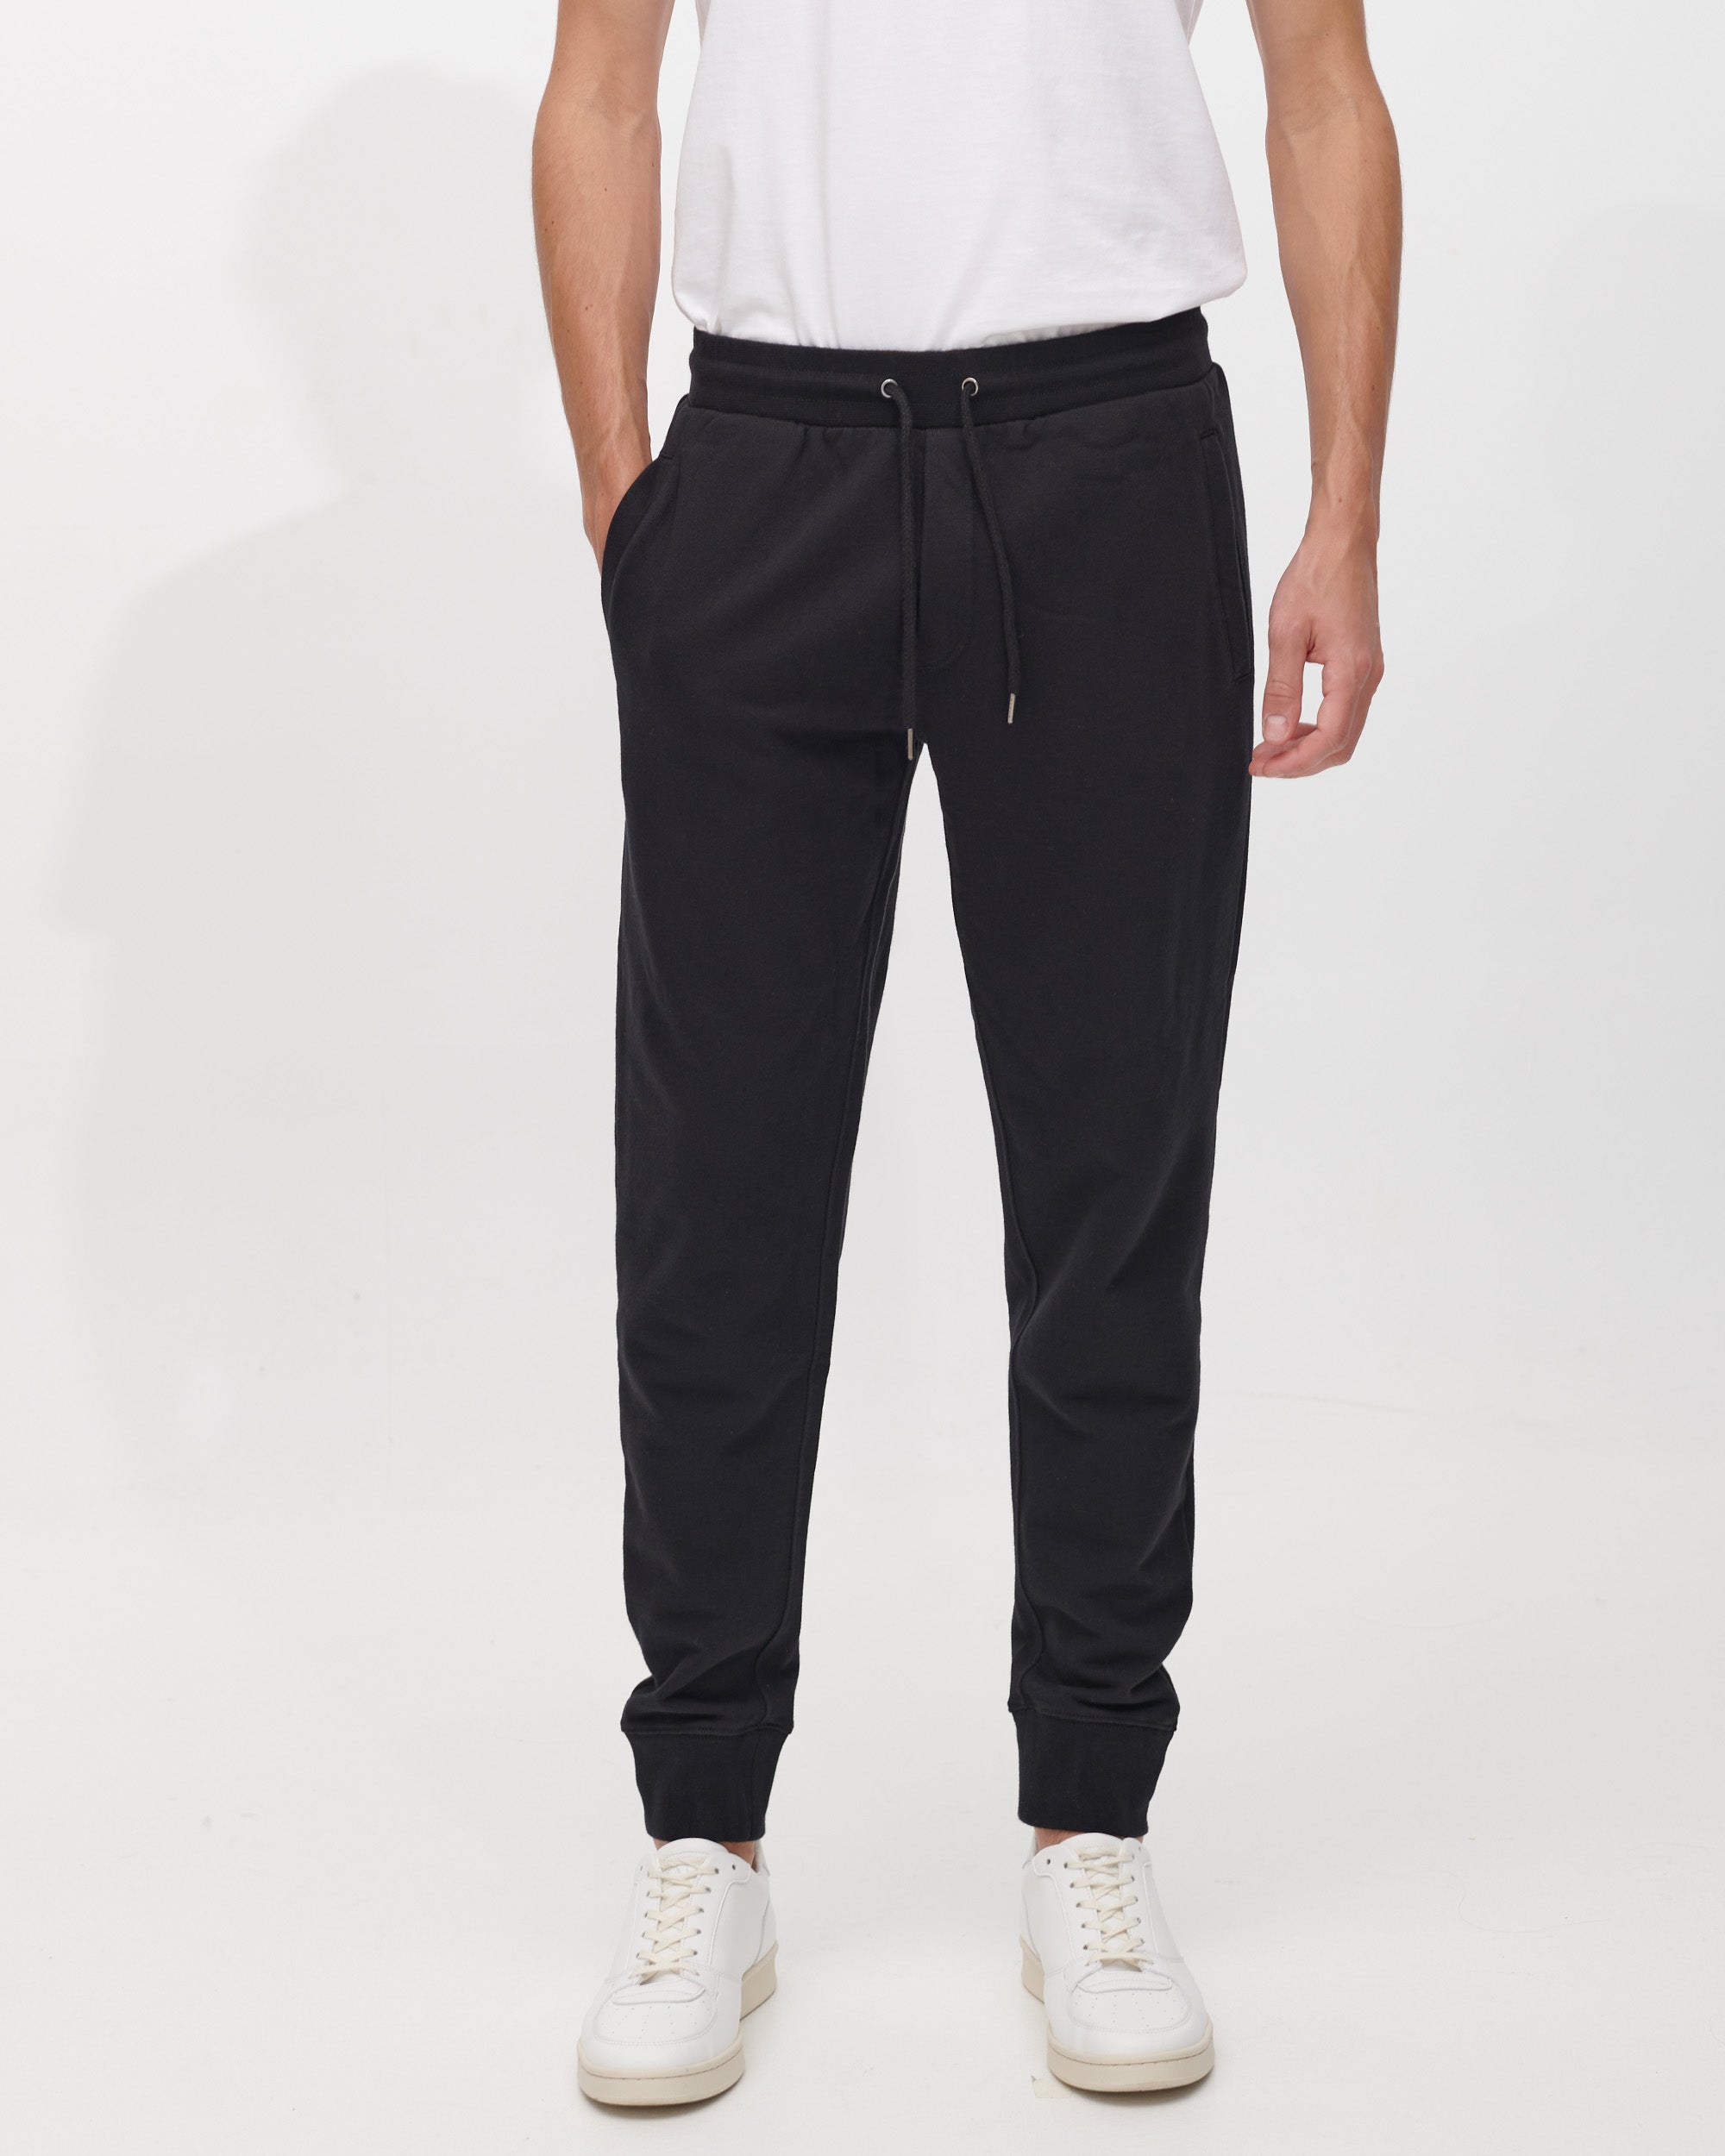 The Perfect Sweatpants - Washed Black